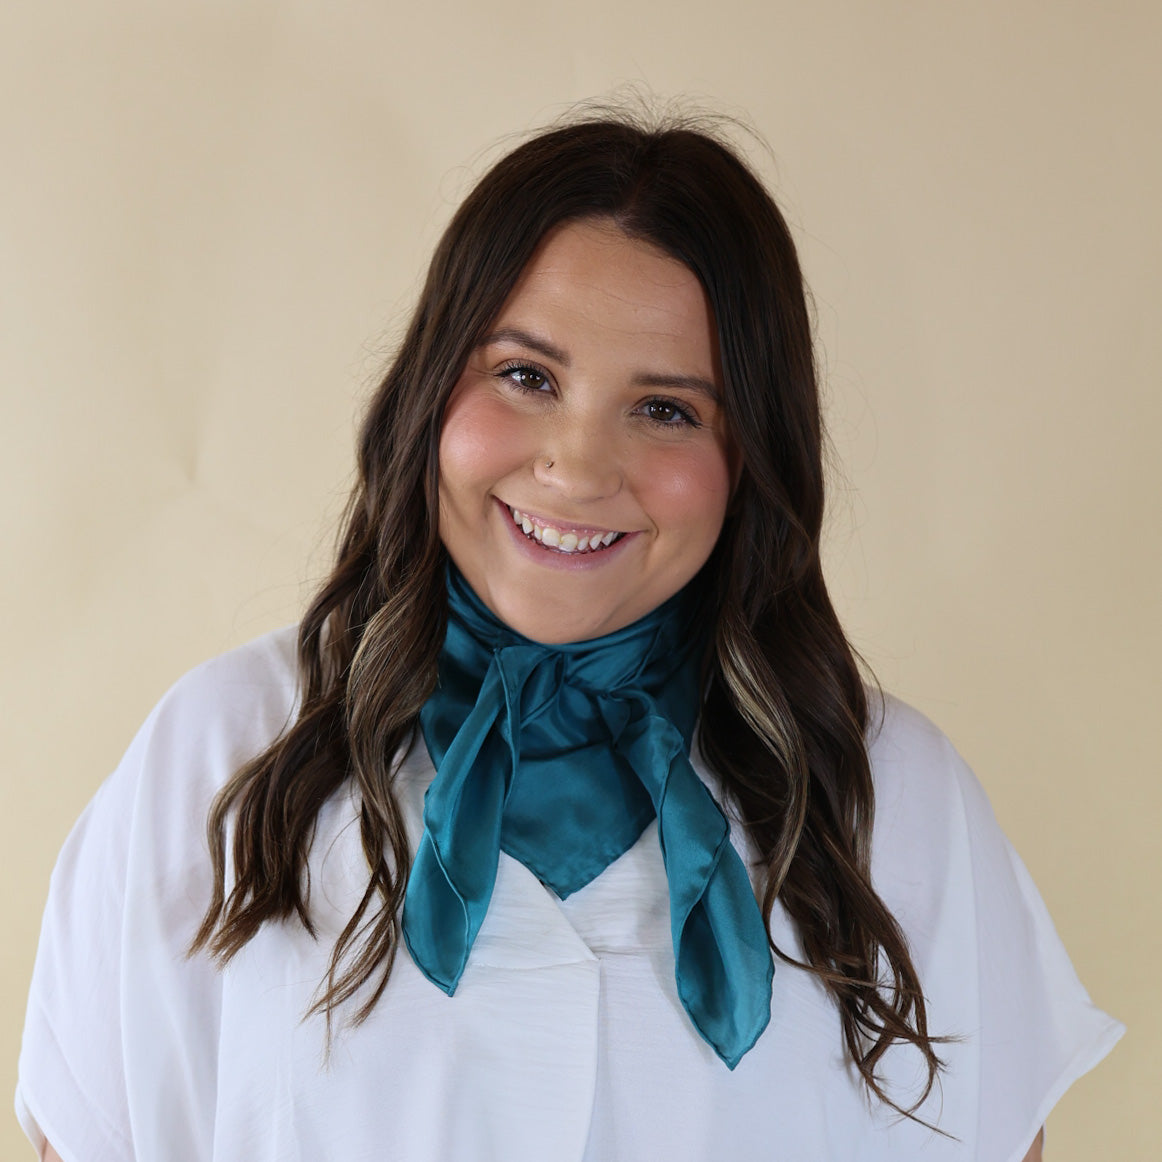 Brunette model is pictured wearing a white, Drop shoulder top with a Solid Blue scarf tied around her neck. Model is pictured in front of a beige background.